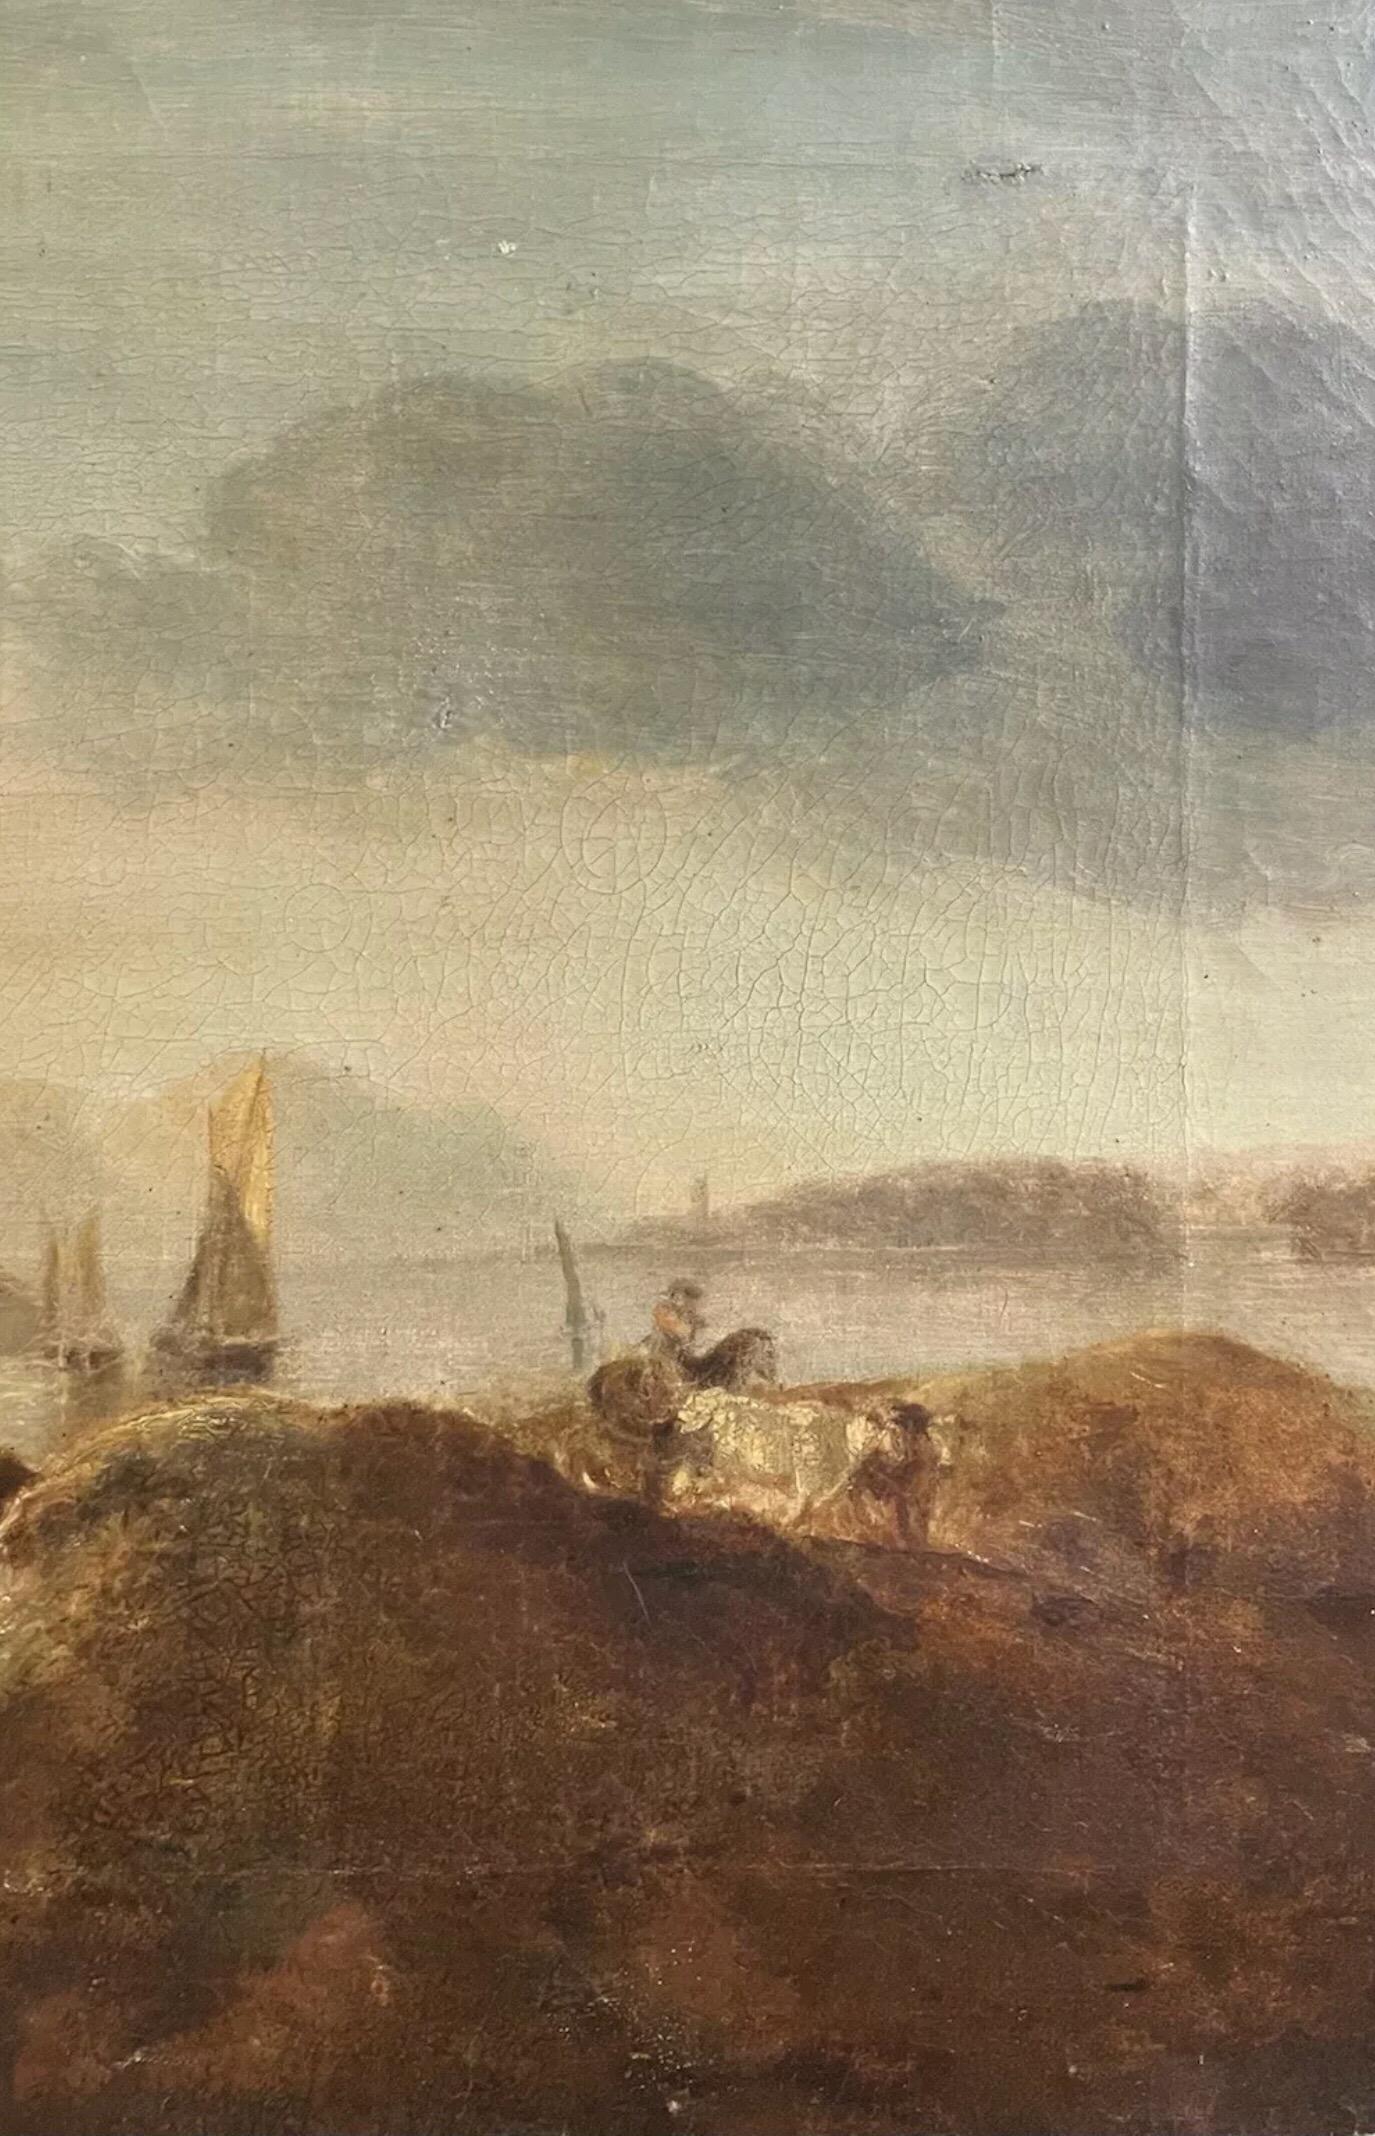 RESTORATION PROJECT

Artist/ School: Dutch School, early 19th century

Title: Coastal Landscape with figures, boats and animals. 

Medium: oil painting on canvas, unframed

Size:  painting: 18.5 x 29 inches
        
Provenance: private collection,